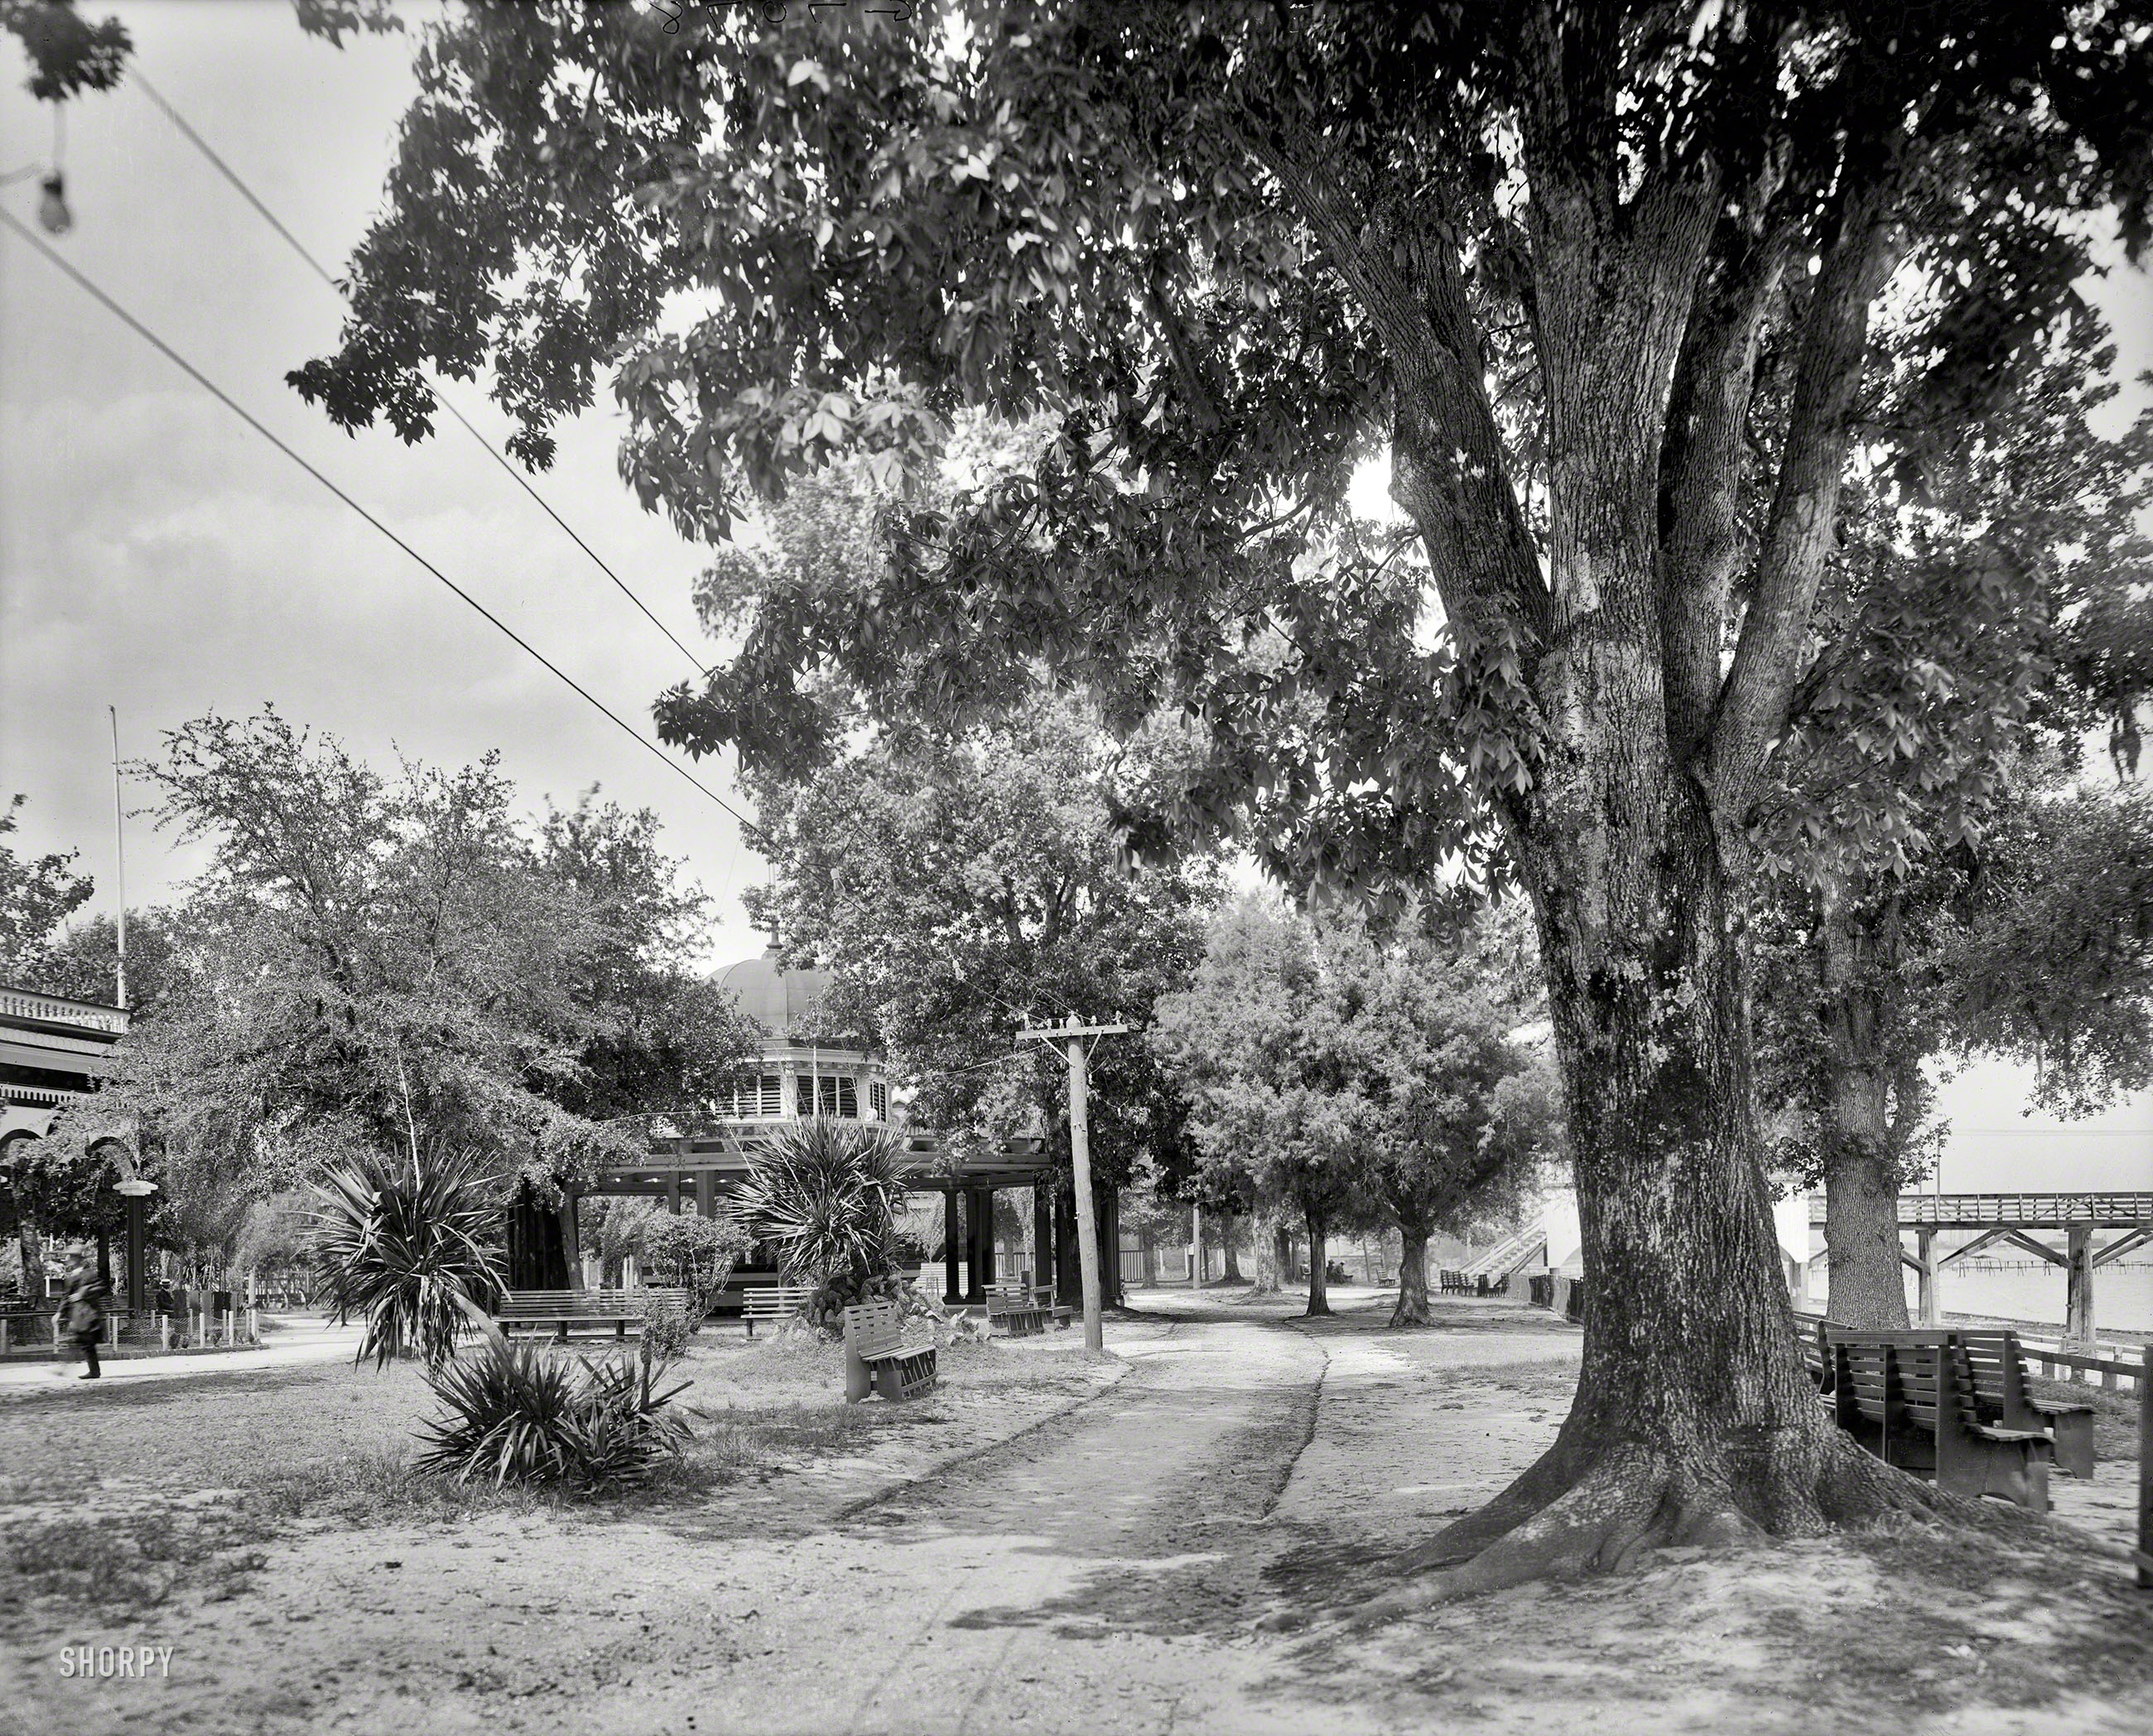 Mobile, Alabama, circa 1910. "A pretty bit of Monroe Park -- bandstand and yacht club pier." 8x10 inch glass negative, Detroit Publishing Co. View full size.